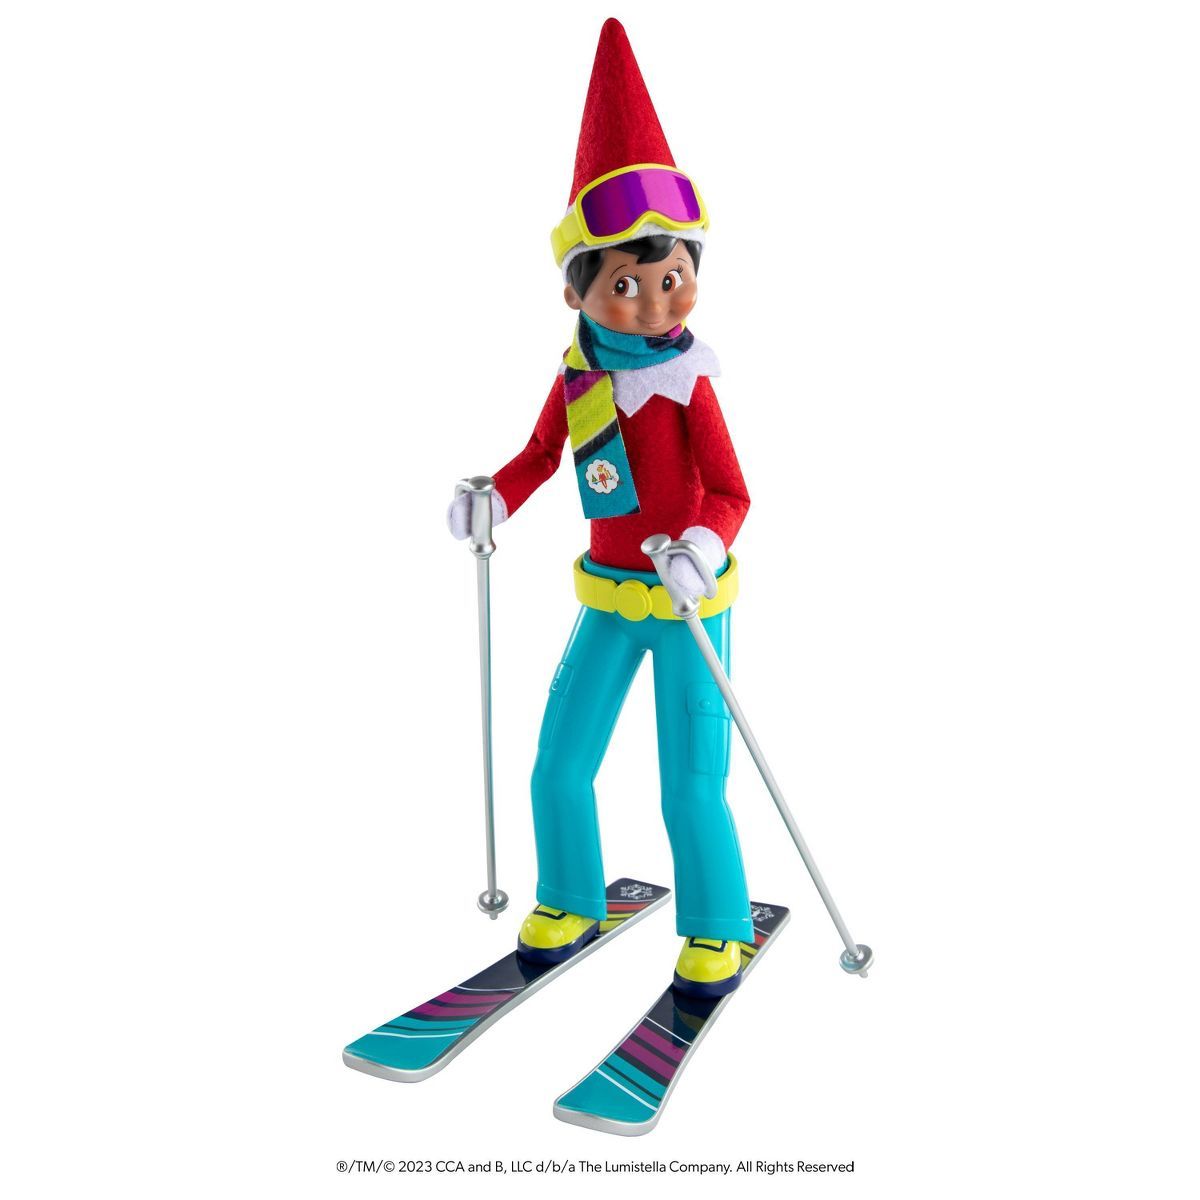 MagiFreez Sleigh the Slopes Set - Target Exclusive Edition | Target